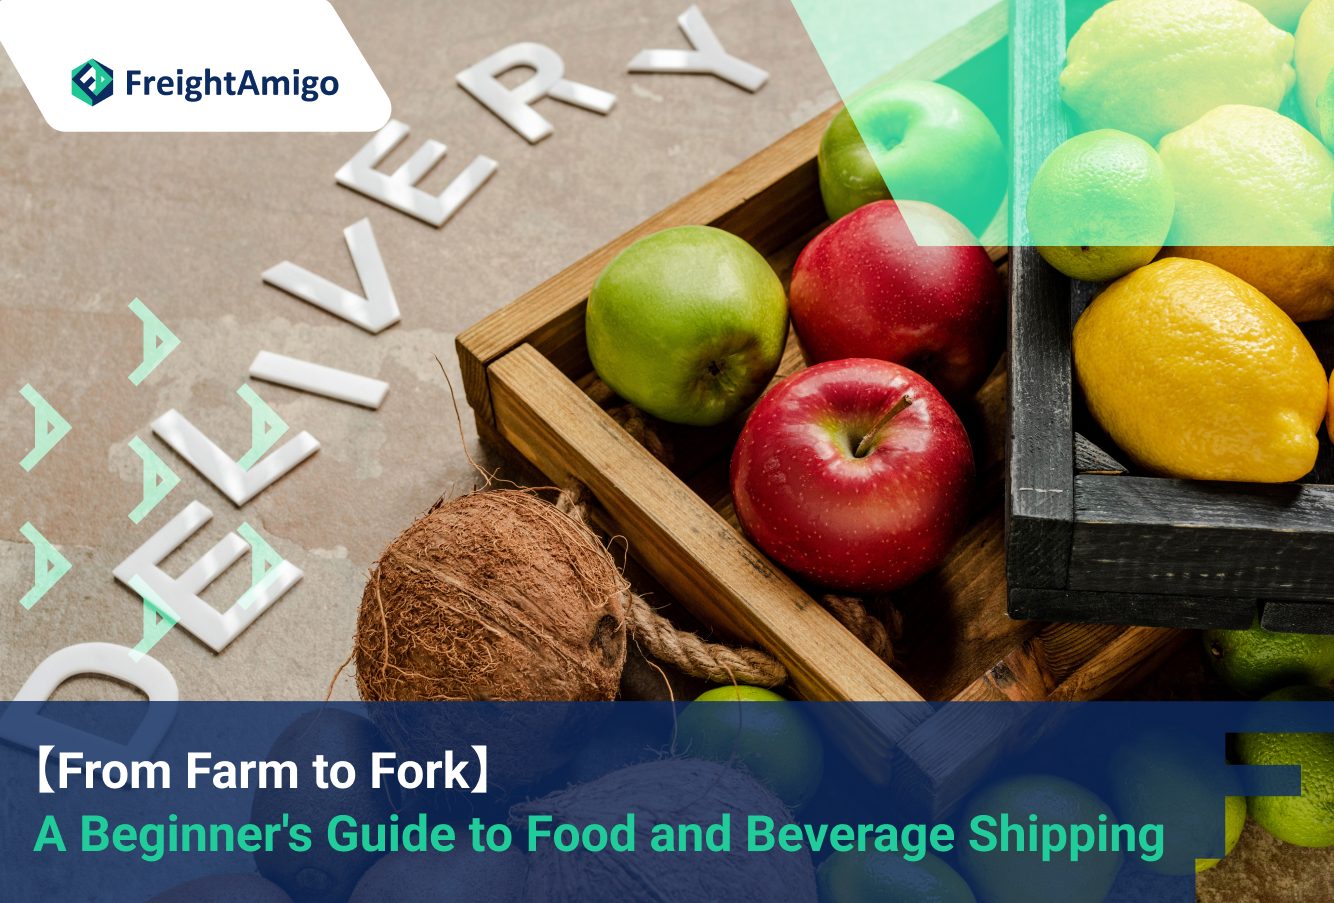 A Beginner's Guide to Food and Beverage Shipping